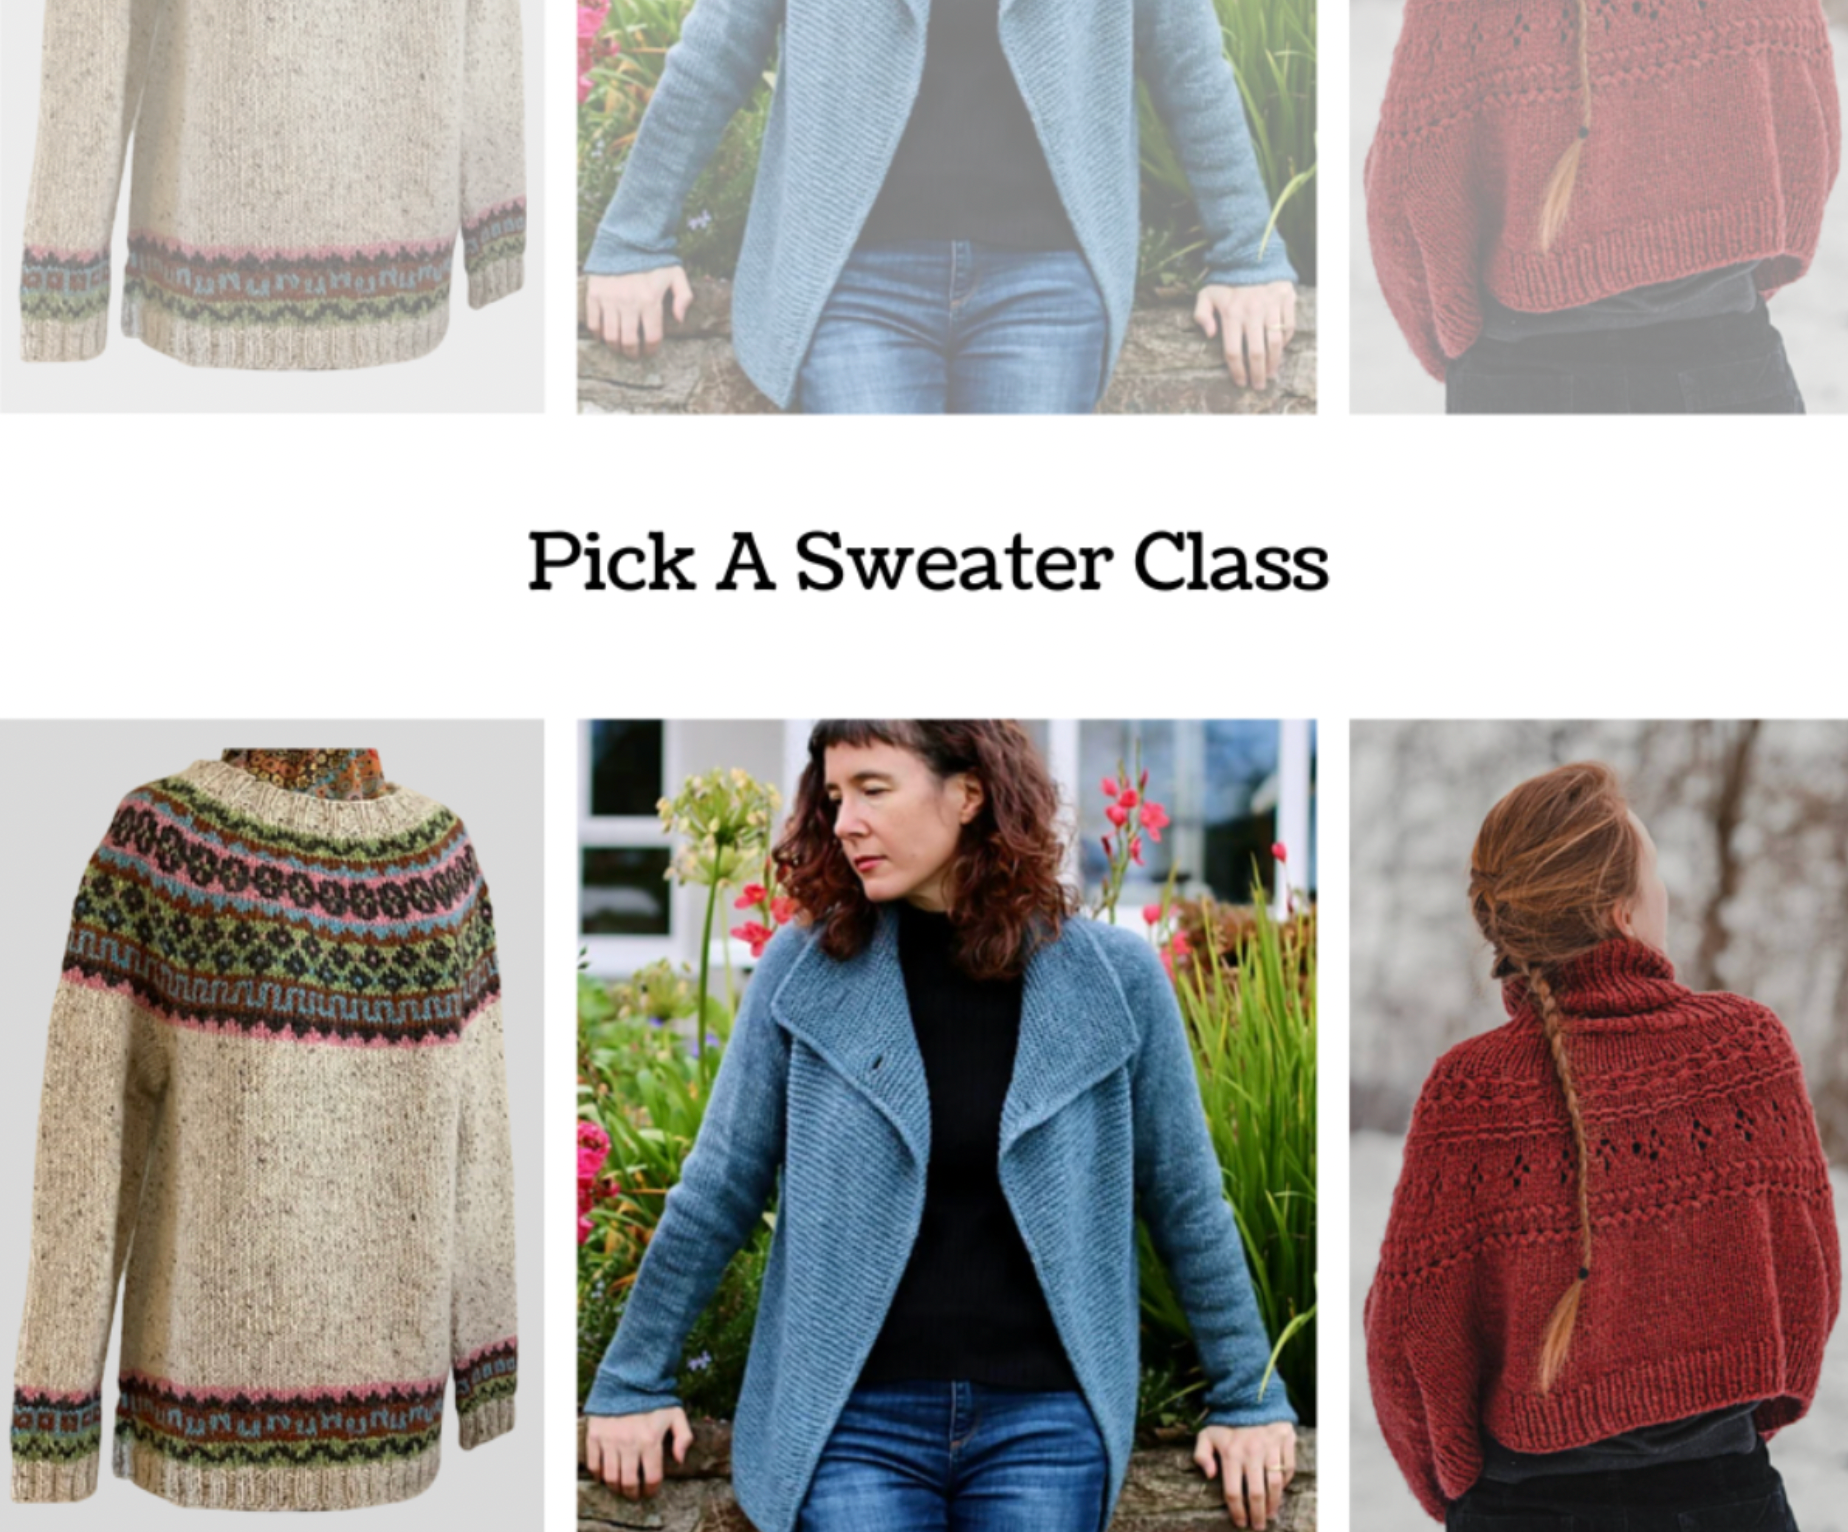 Knit ANY Sweater: Class  with Miss Deb  - starts Nov 6